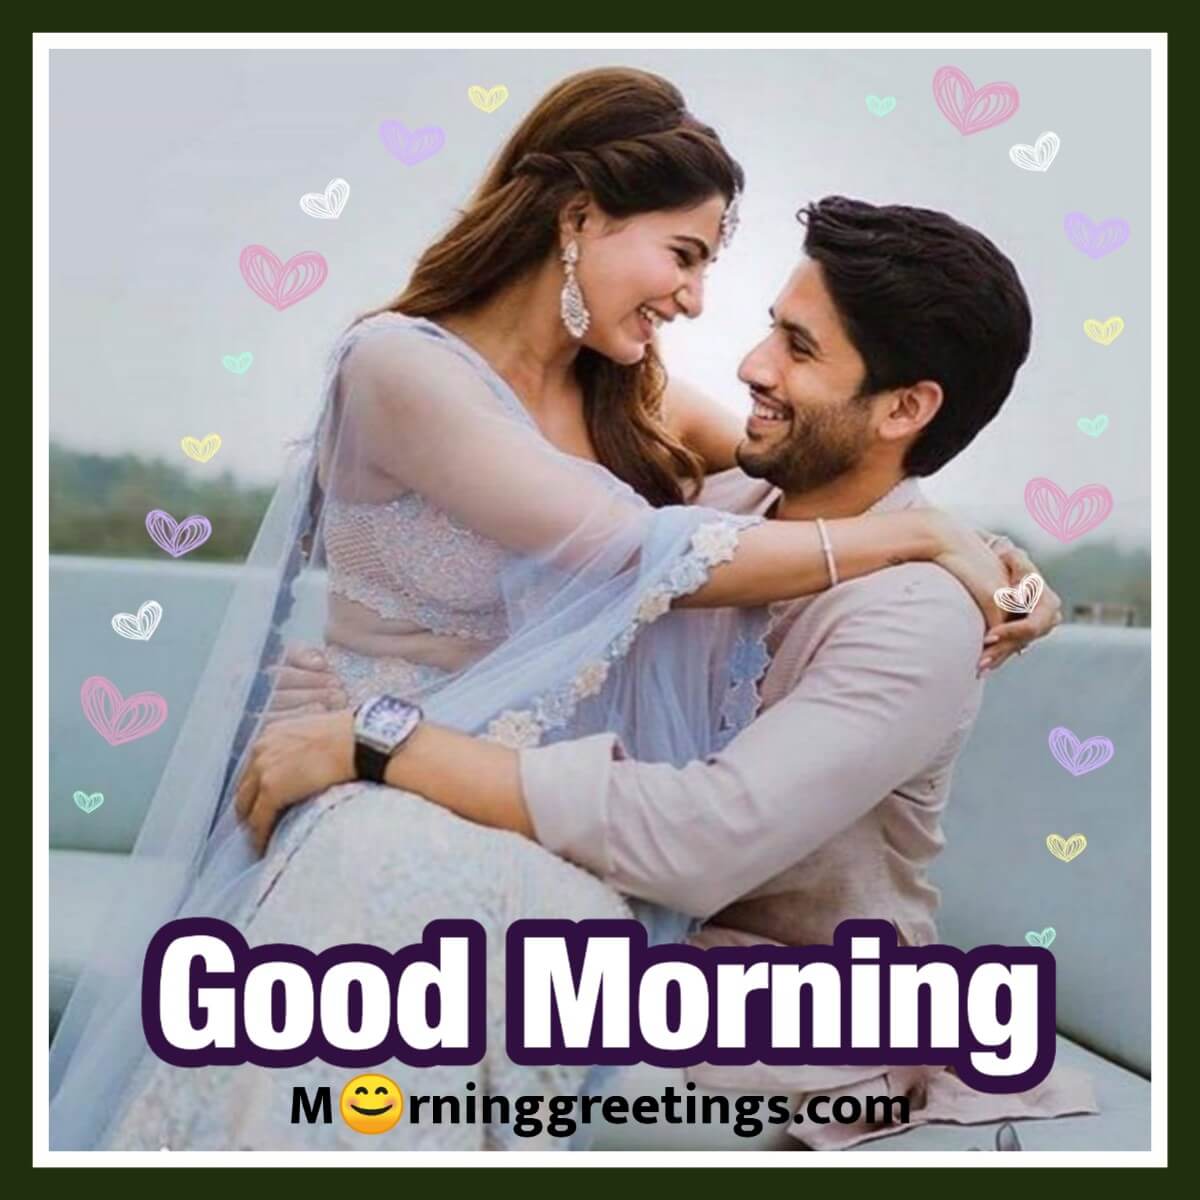 Good Morning Hug In Bed Images